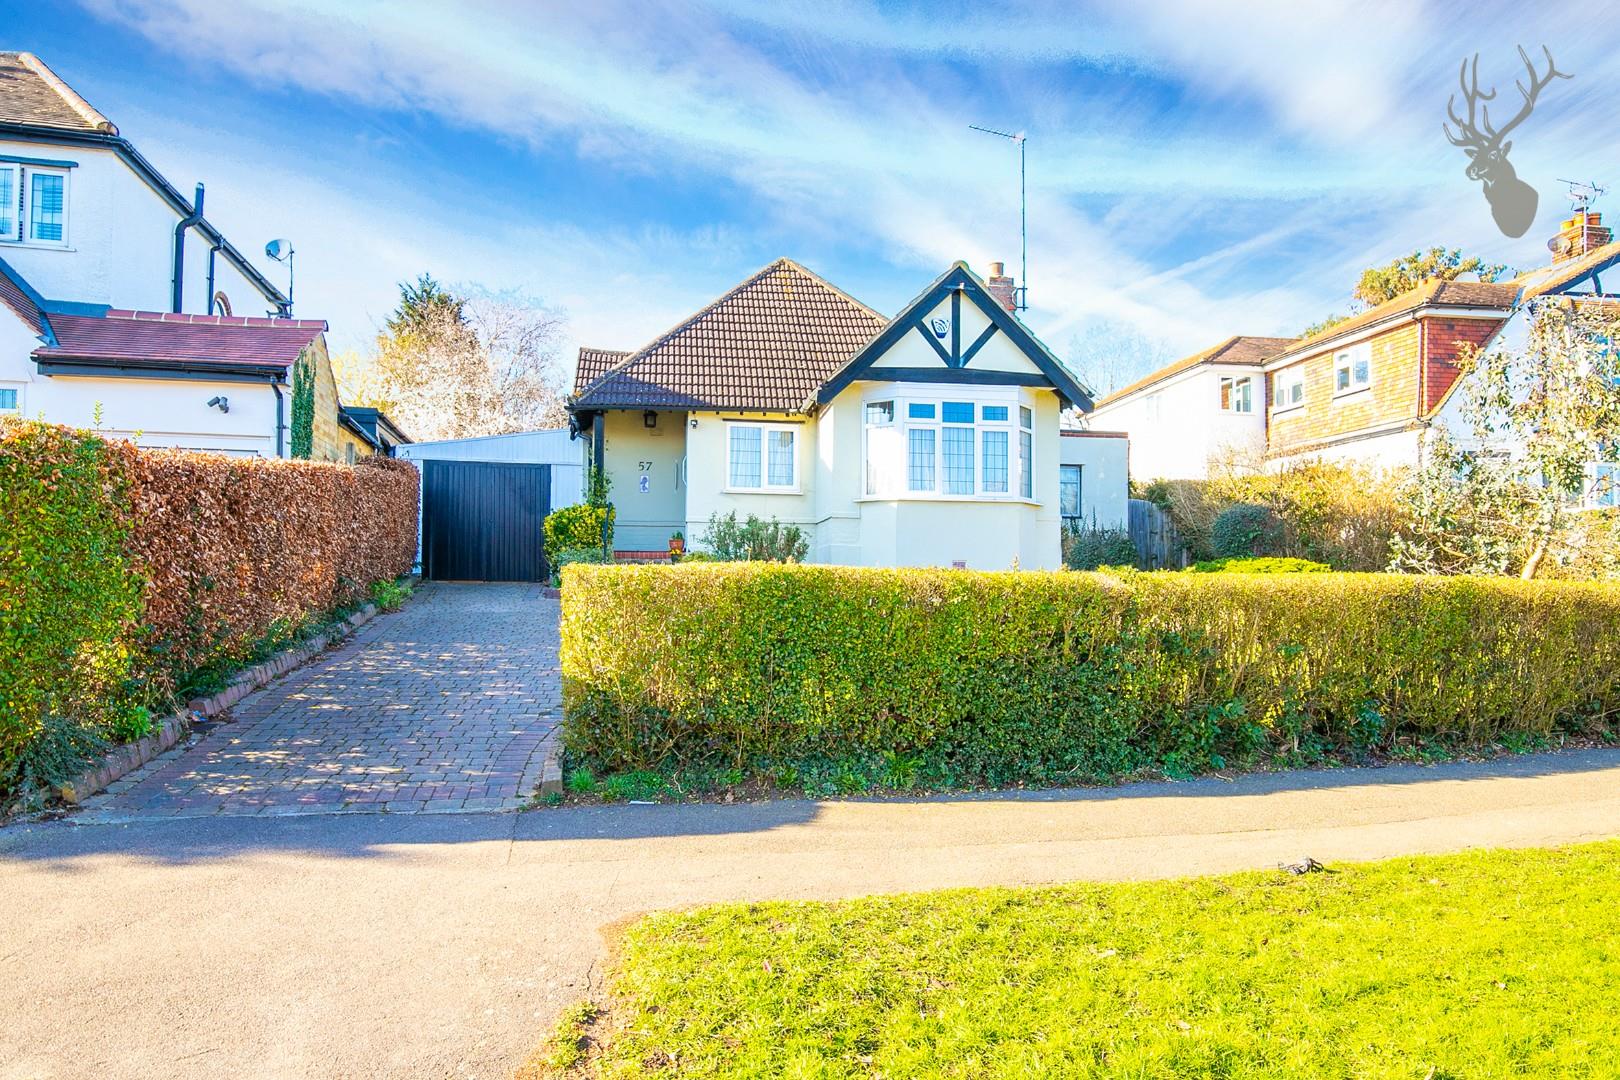 Similar Property: Bungalow - Detached in Theydon Bois